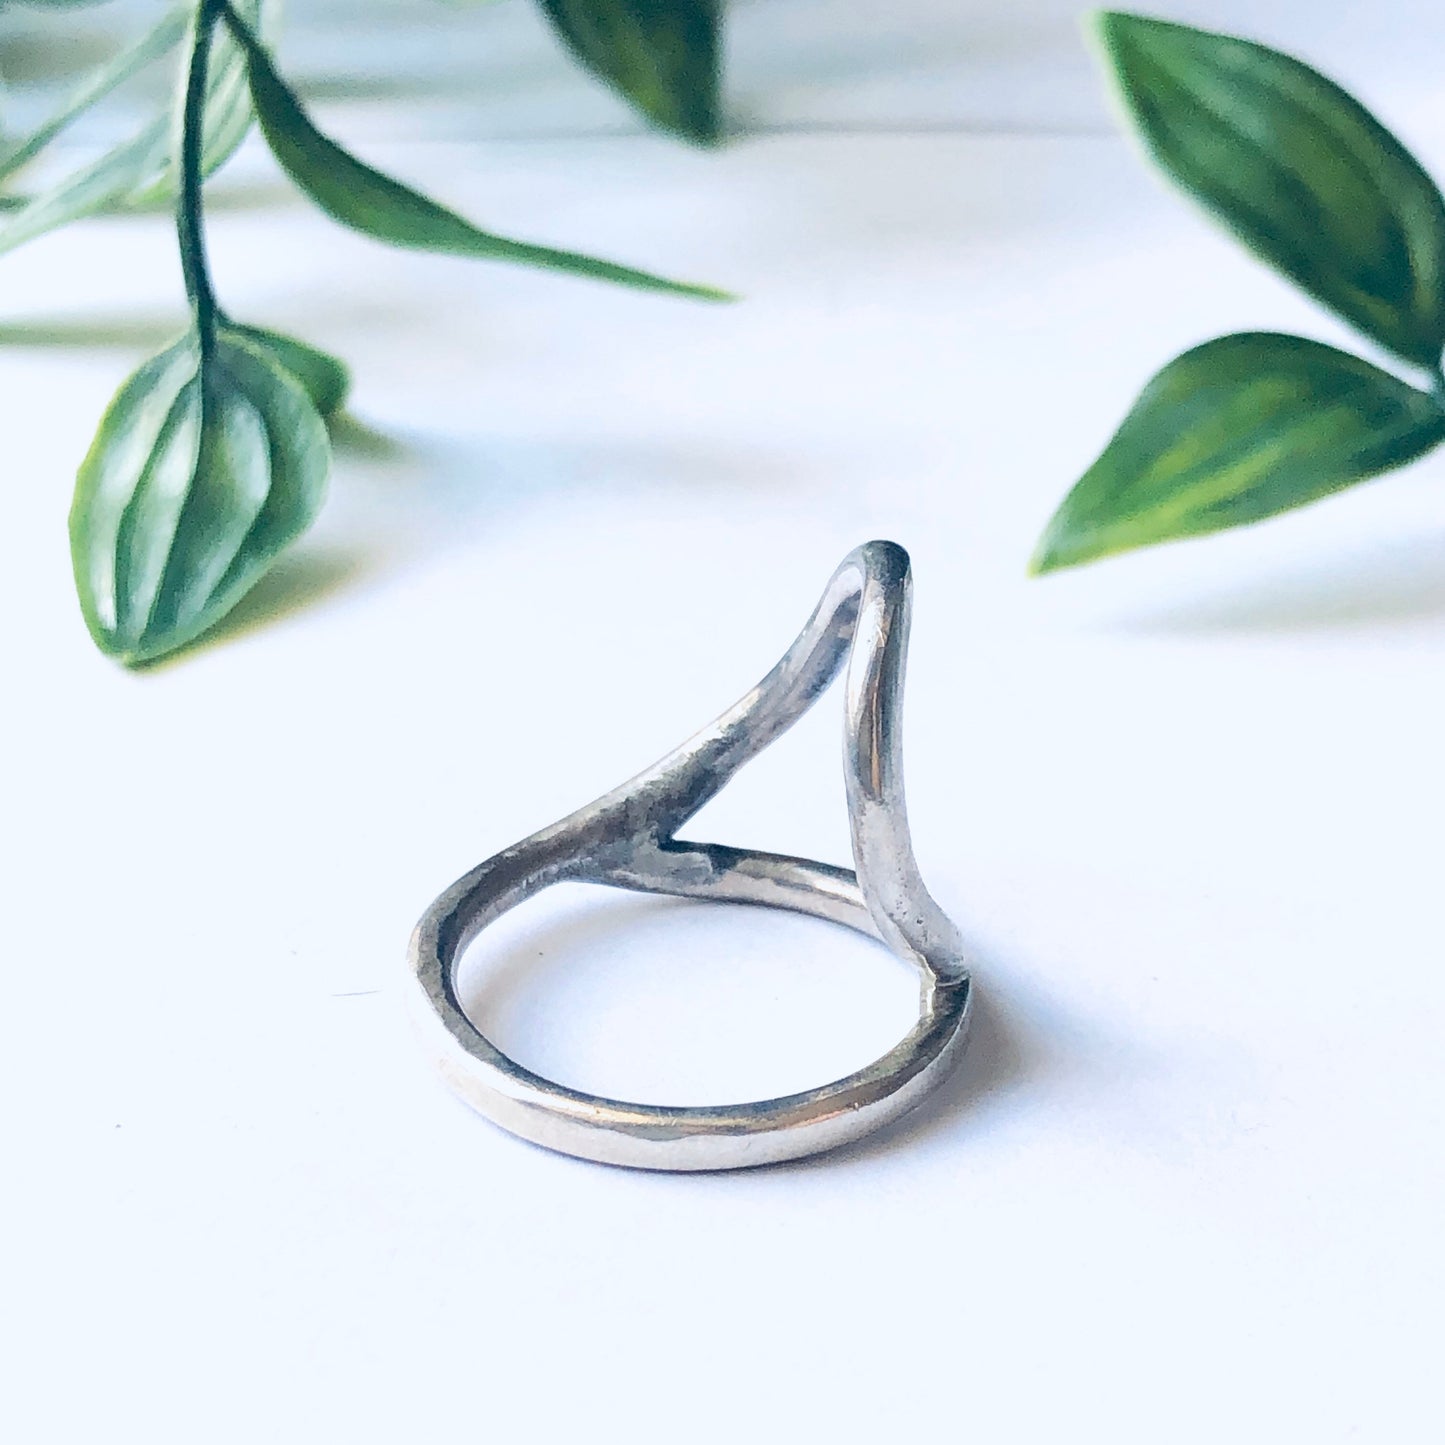 Vintage silver cut out ring with minimalist abstract design displayed on white background with green leaves in the background.